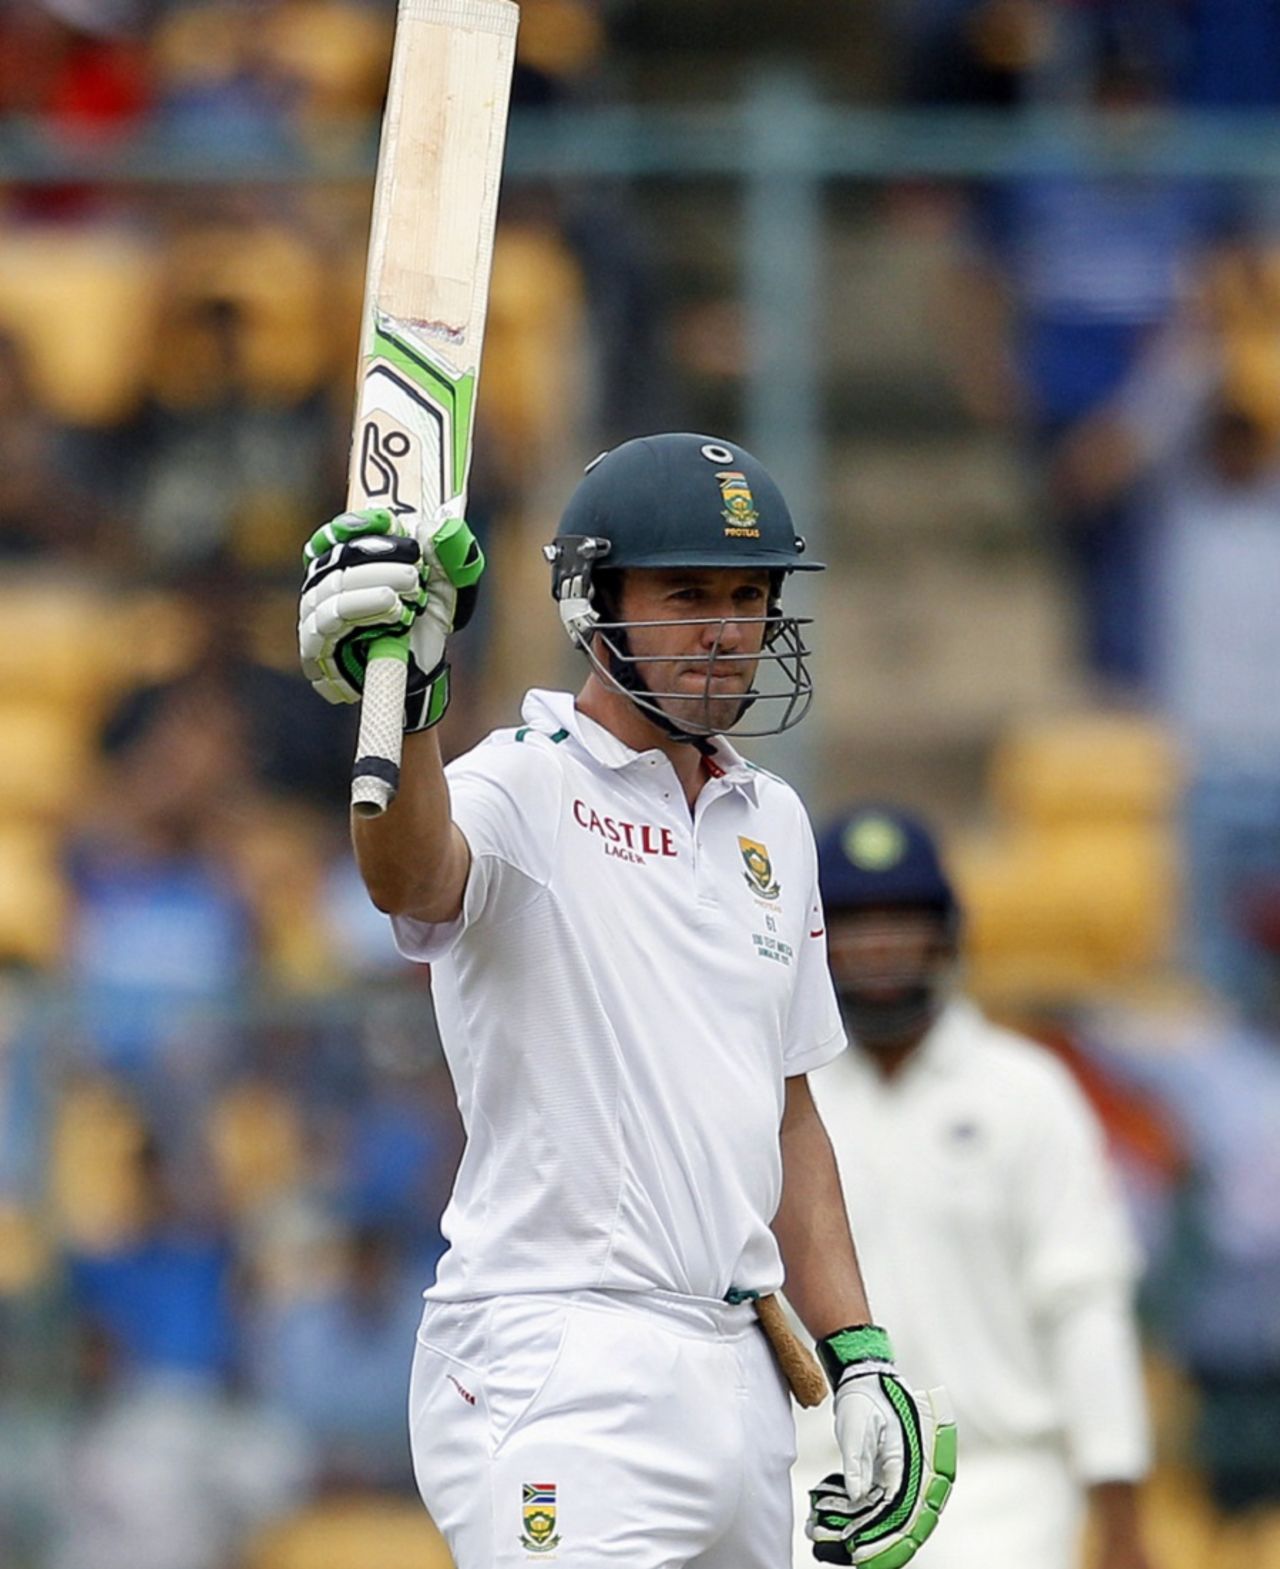 AB de Villiers acknowledges the cheers after completing his half-century, India v South Africa, 2nd Test, 1st day, Bangalore, November 14, 2015